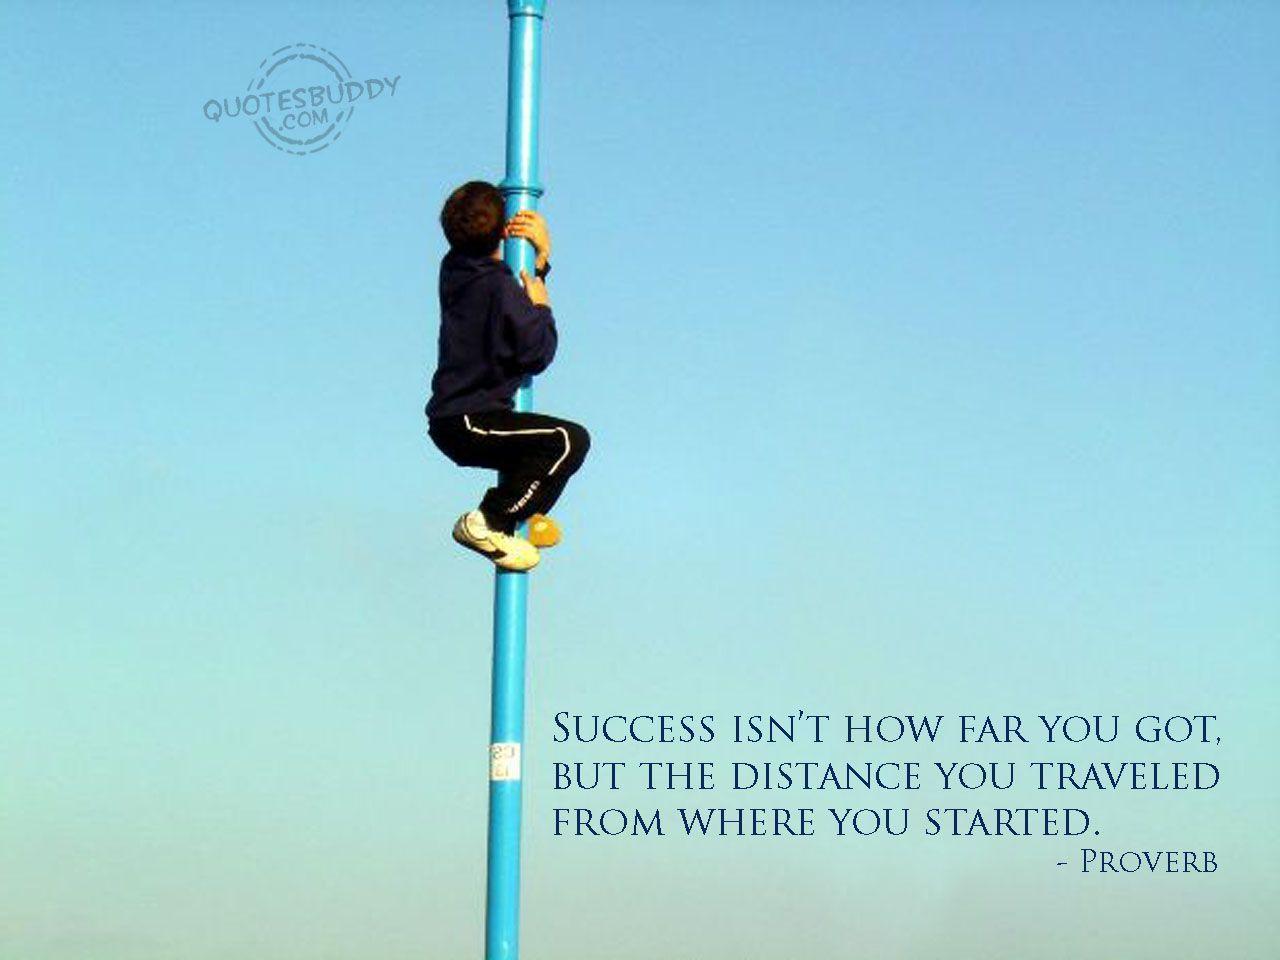 Success Quotes HD Wallpaper. journey to success